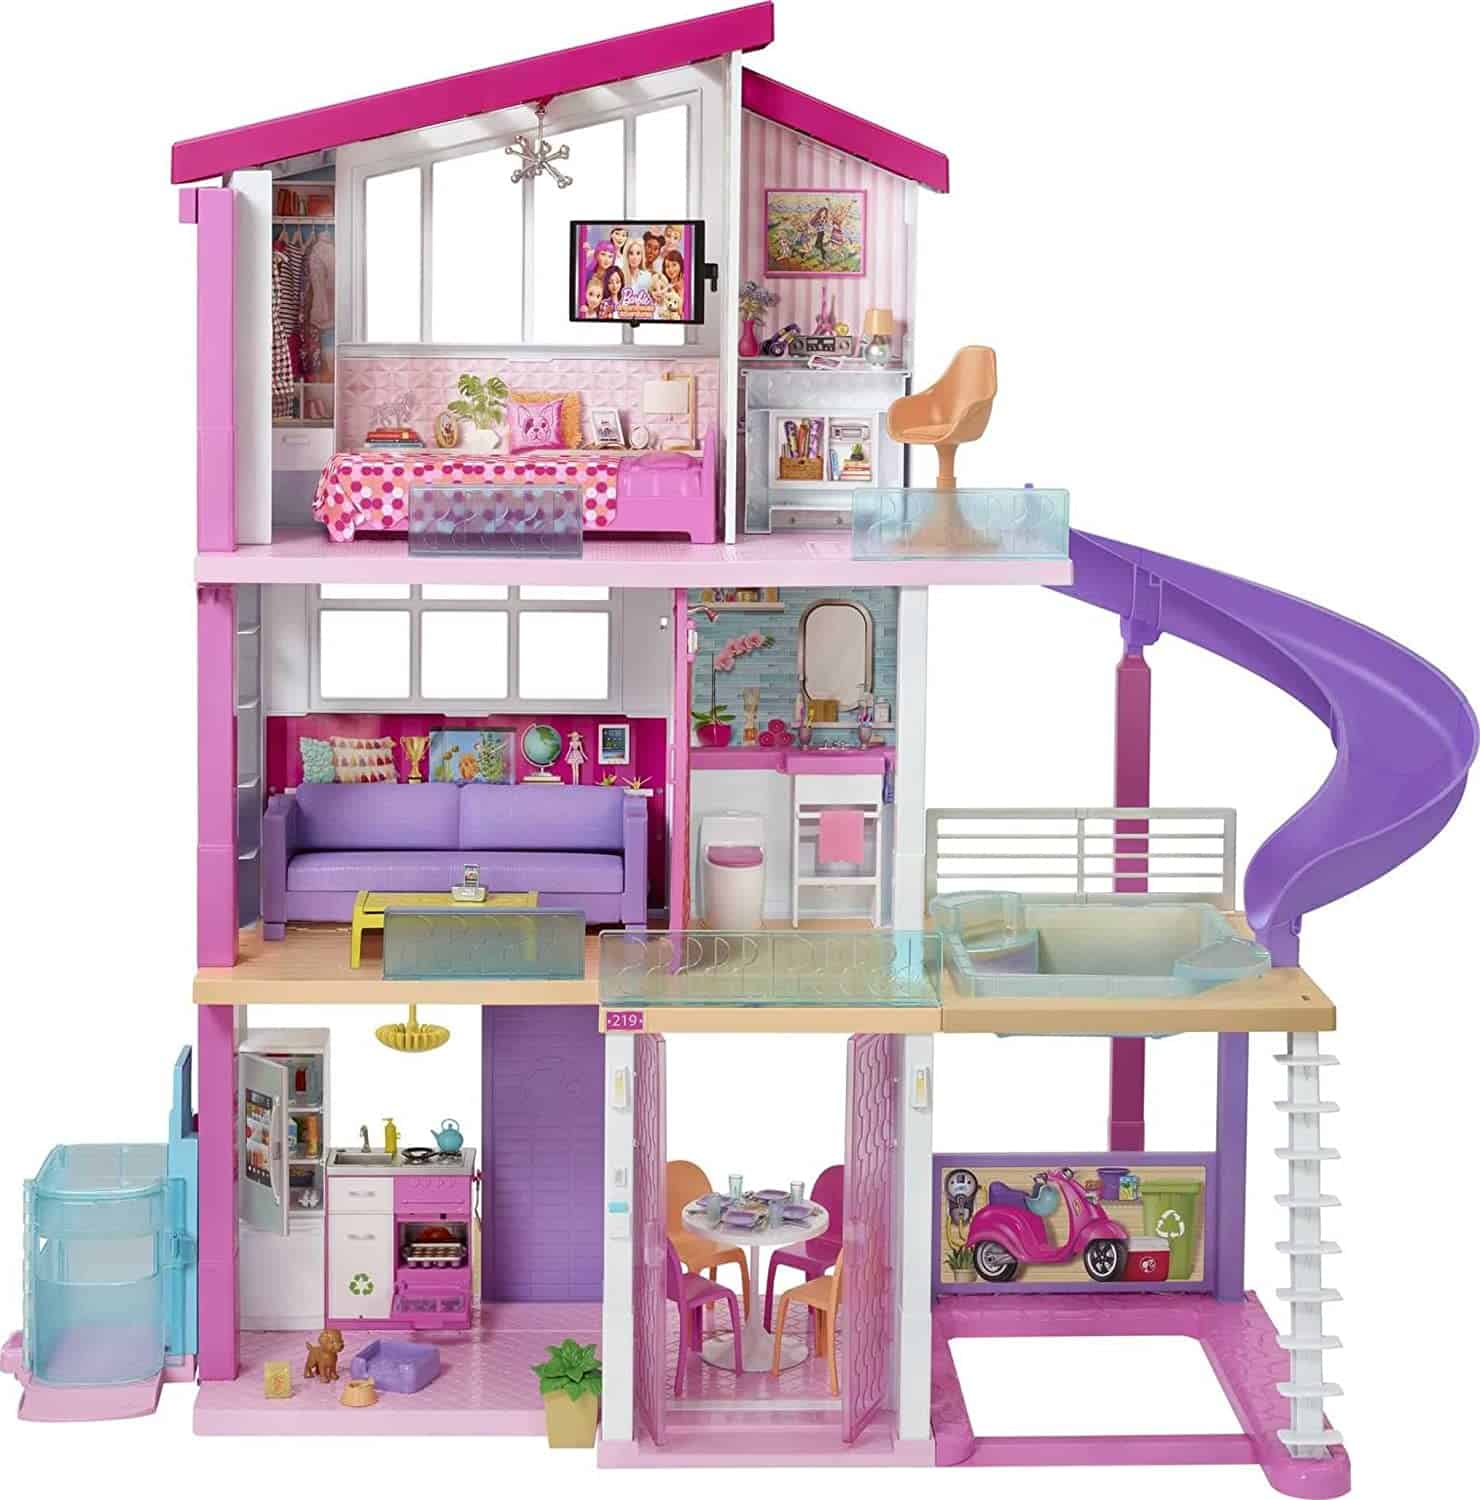 Barbie Dreamhouse with Elevator, Pool, And Slide